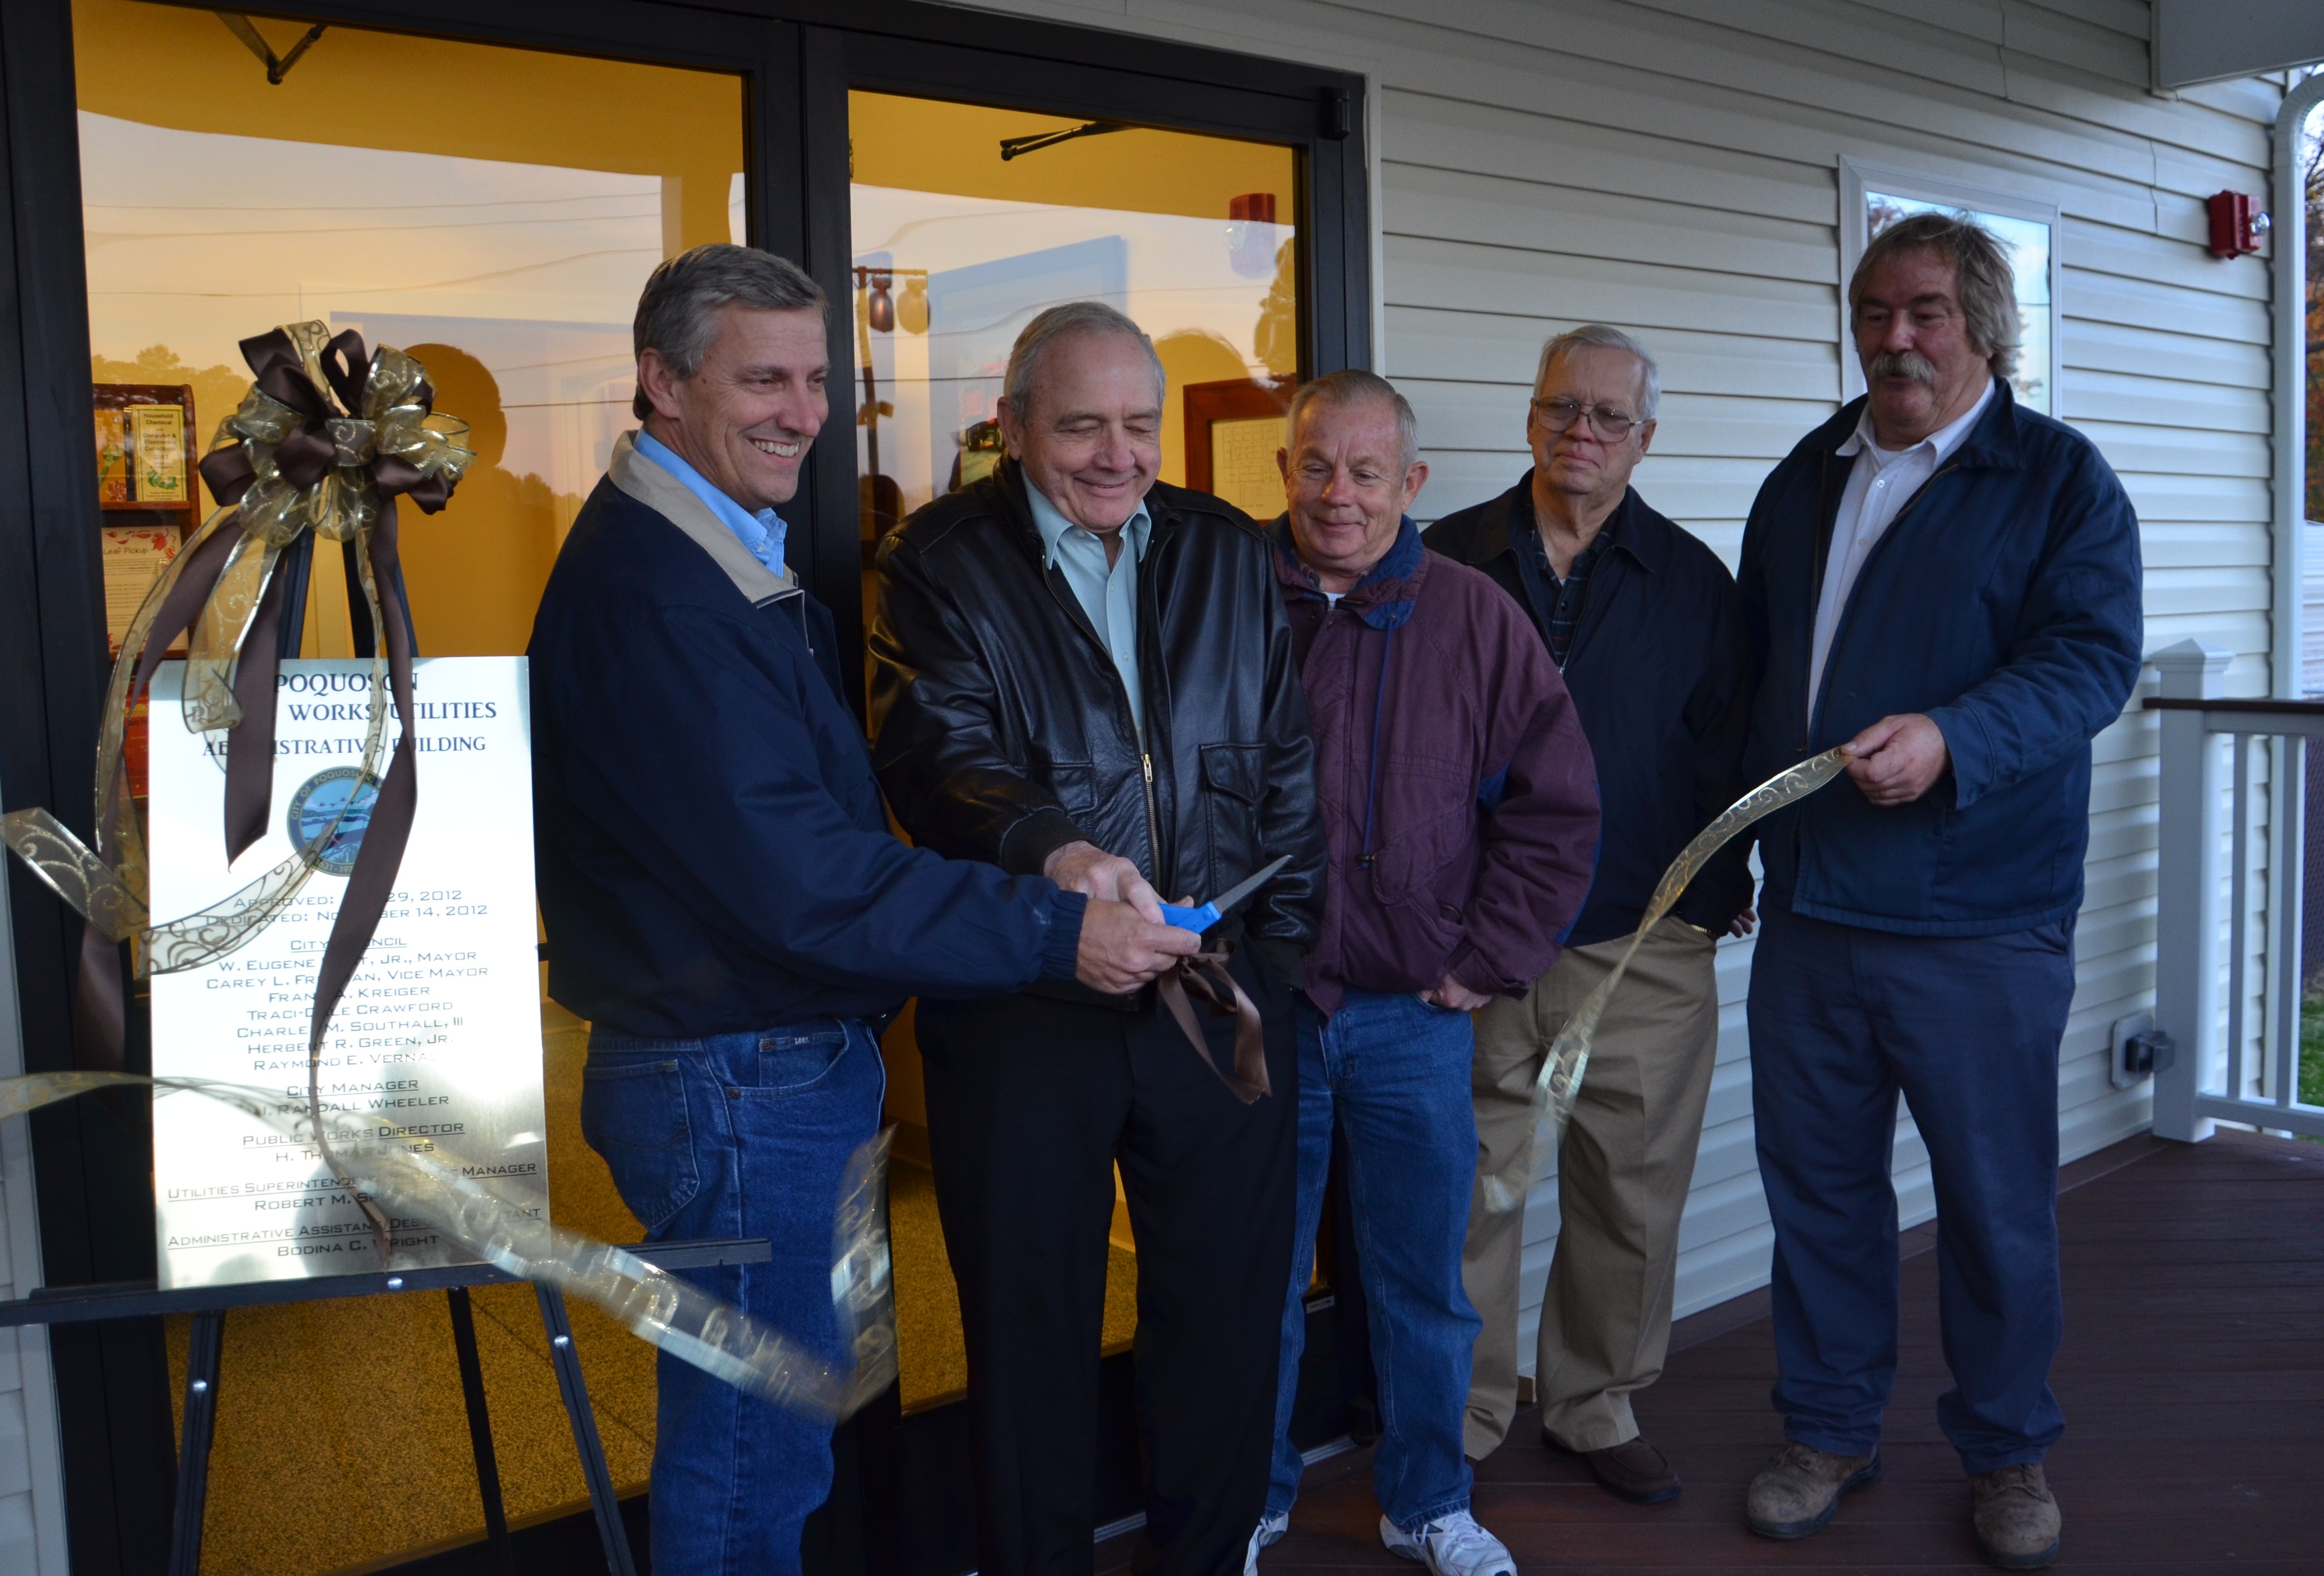 On hand for the dedication of the new building were (l-r) Mayor W. Eugene Hunt Jr., Vice Mayor Carey L. Freeman, Council Members Charles M. Southall III and Raymond E. Vernall, and Utilities Superintendent Robert M. Speechley.